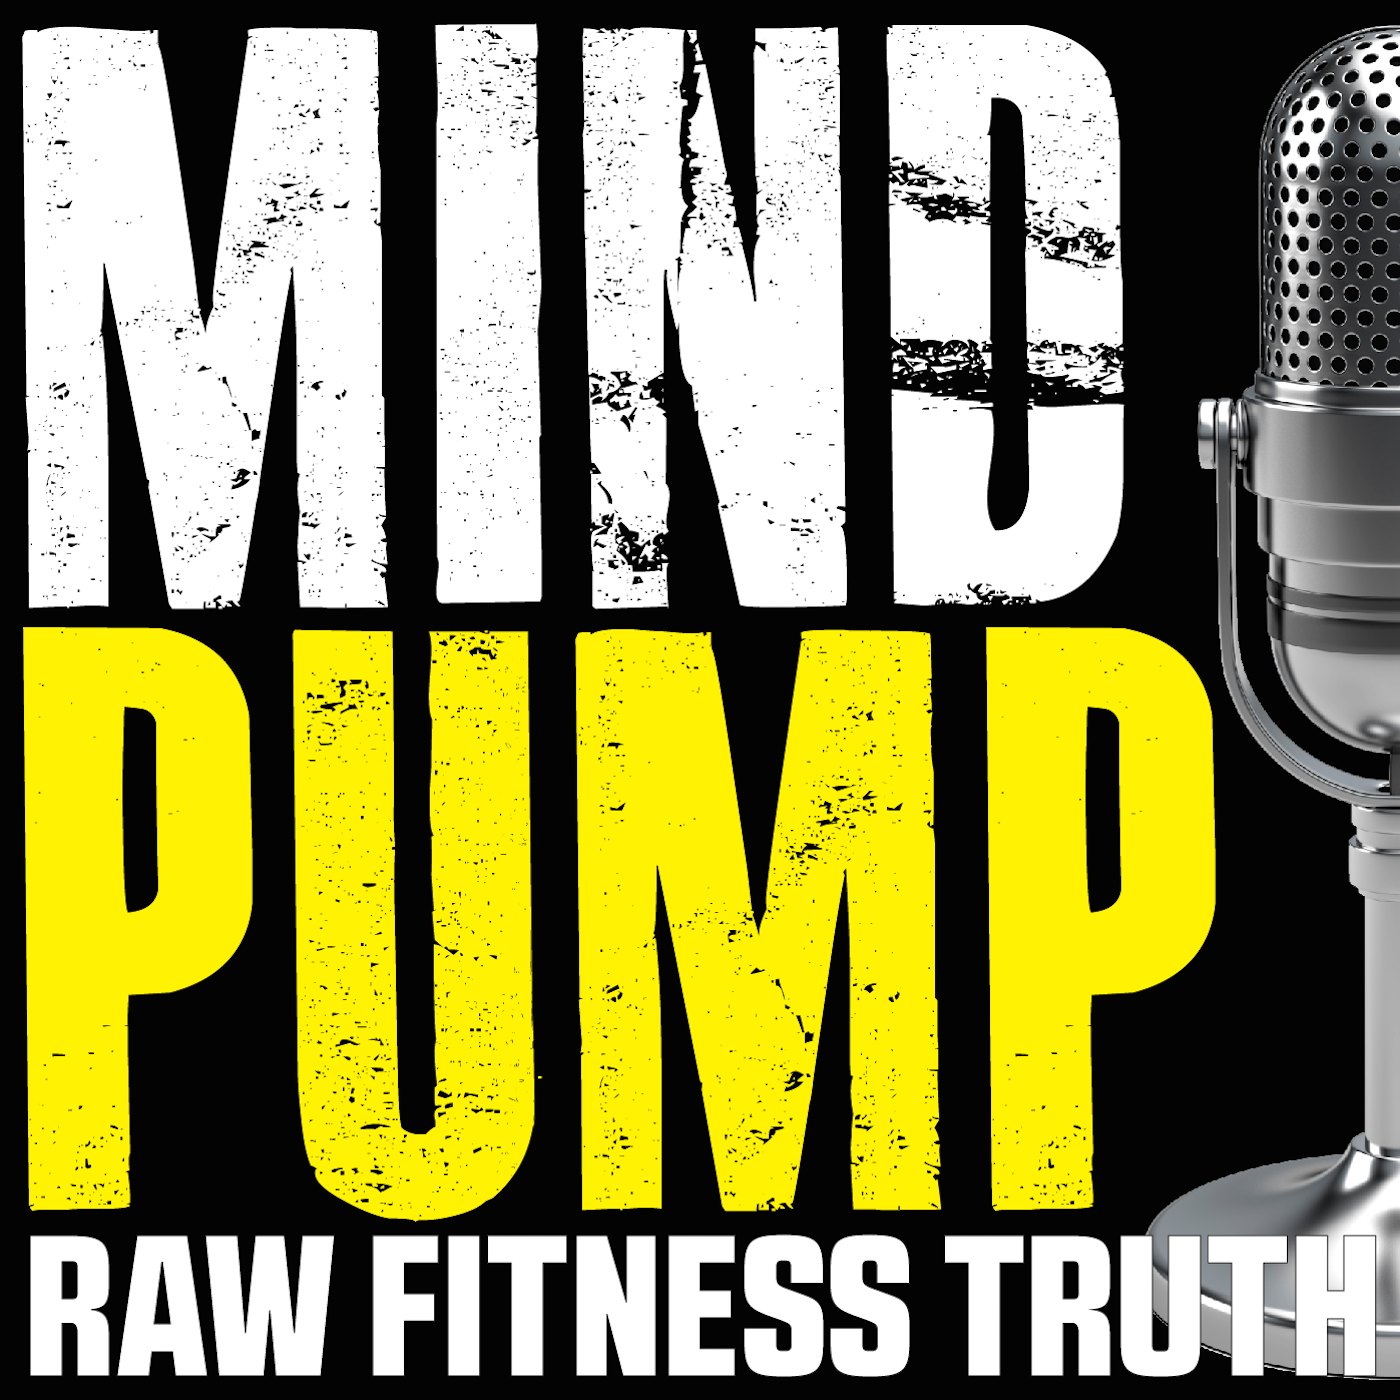 053: Creatine, Building Calves, Muscle Imbalances & Working Out When Sick